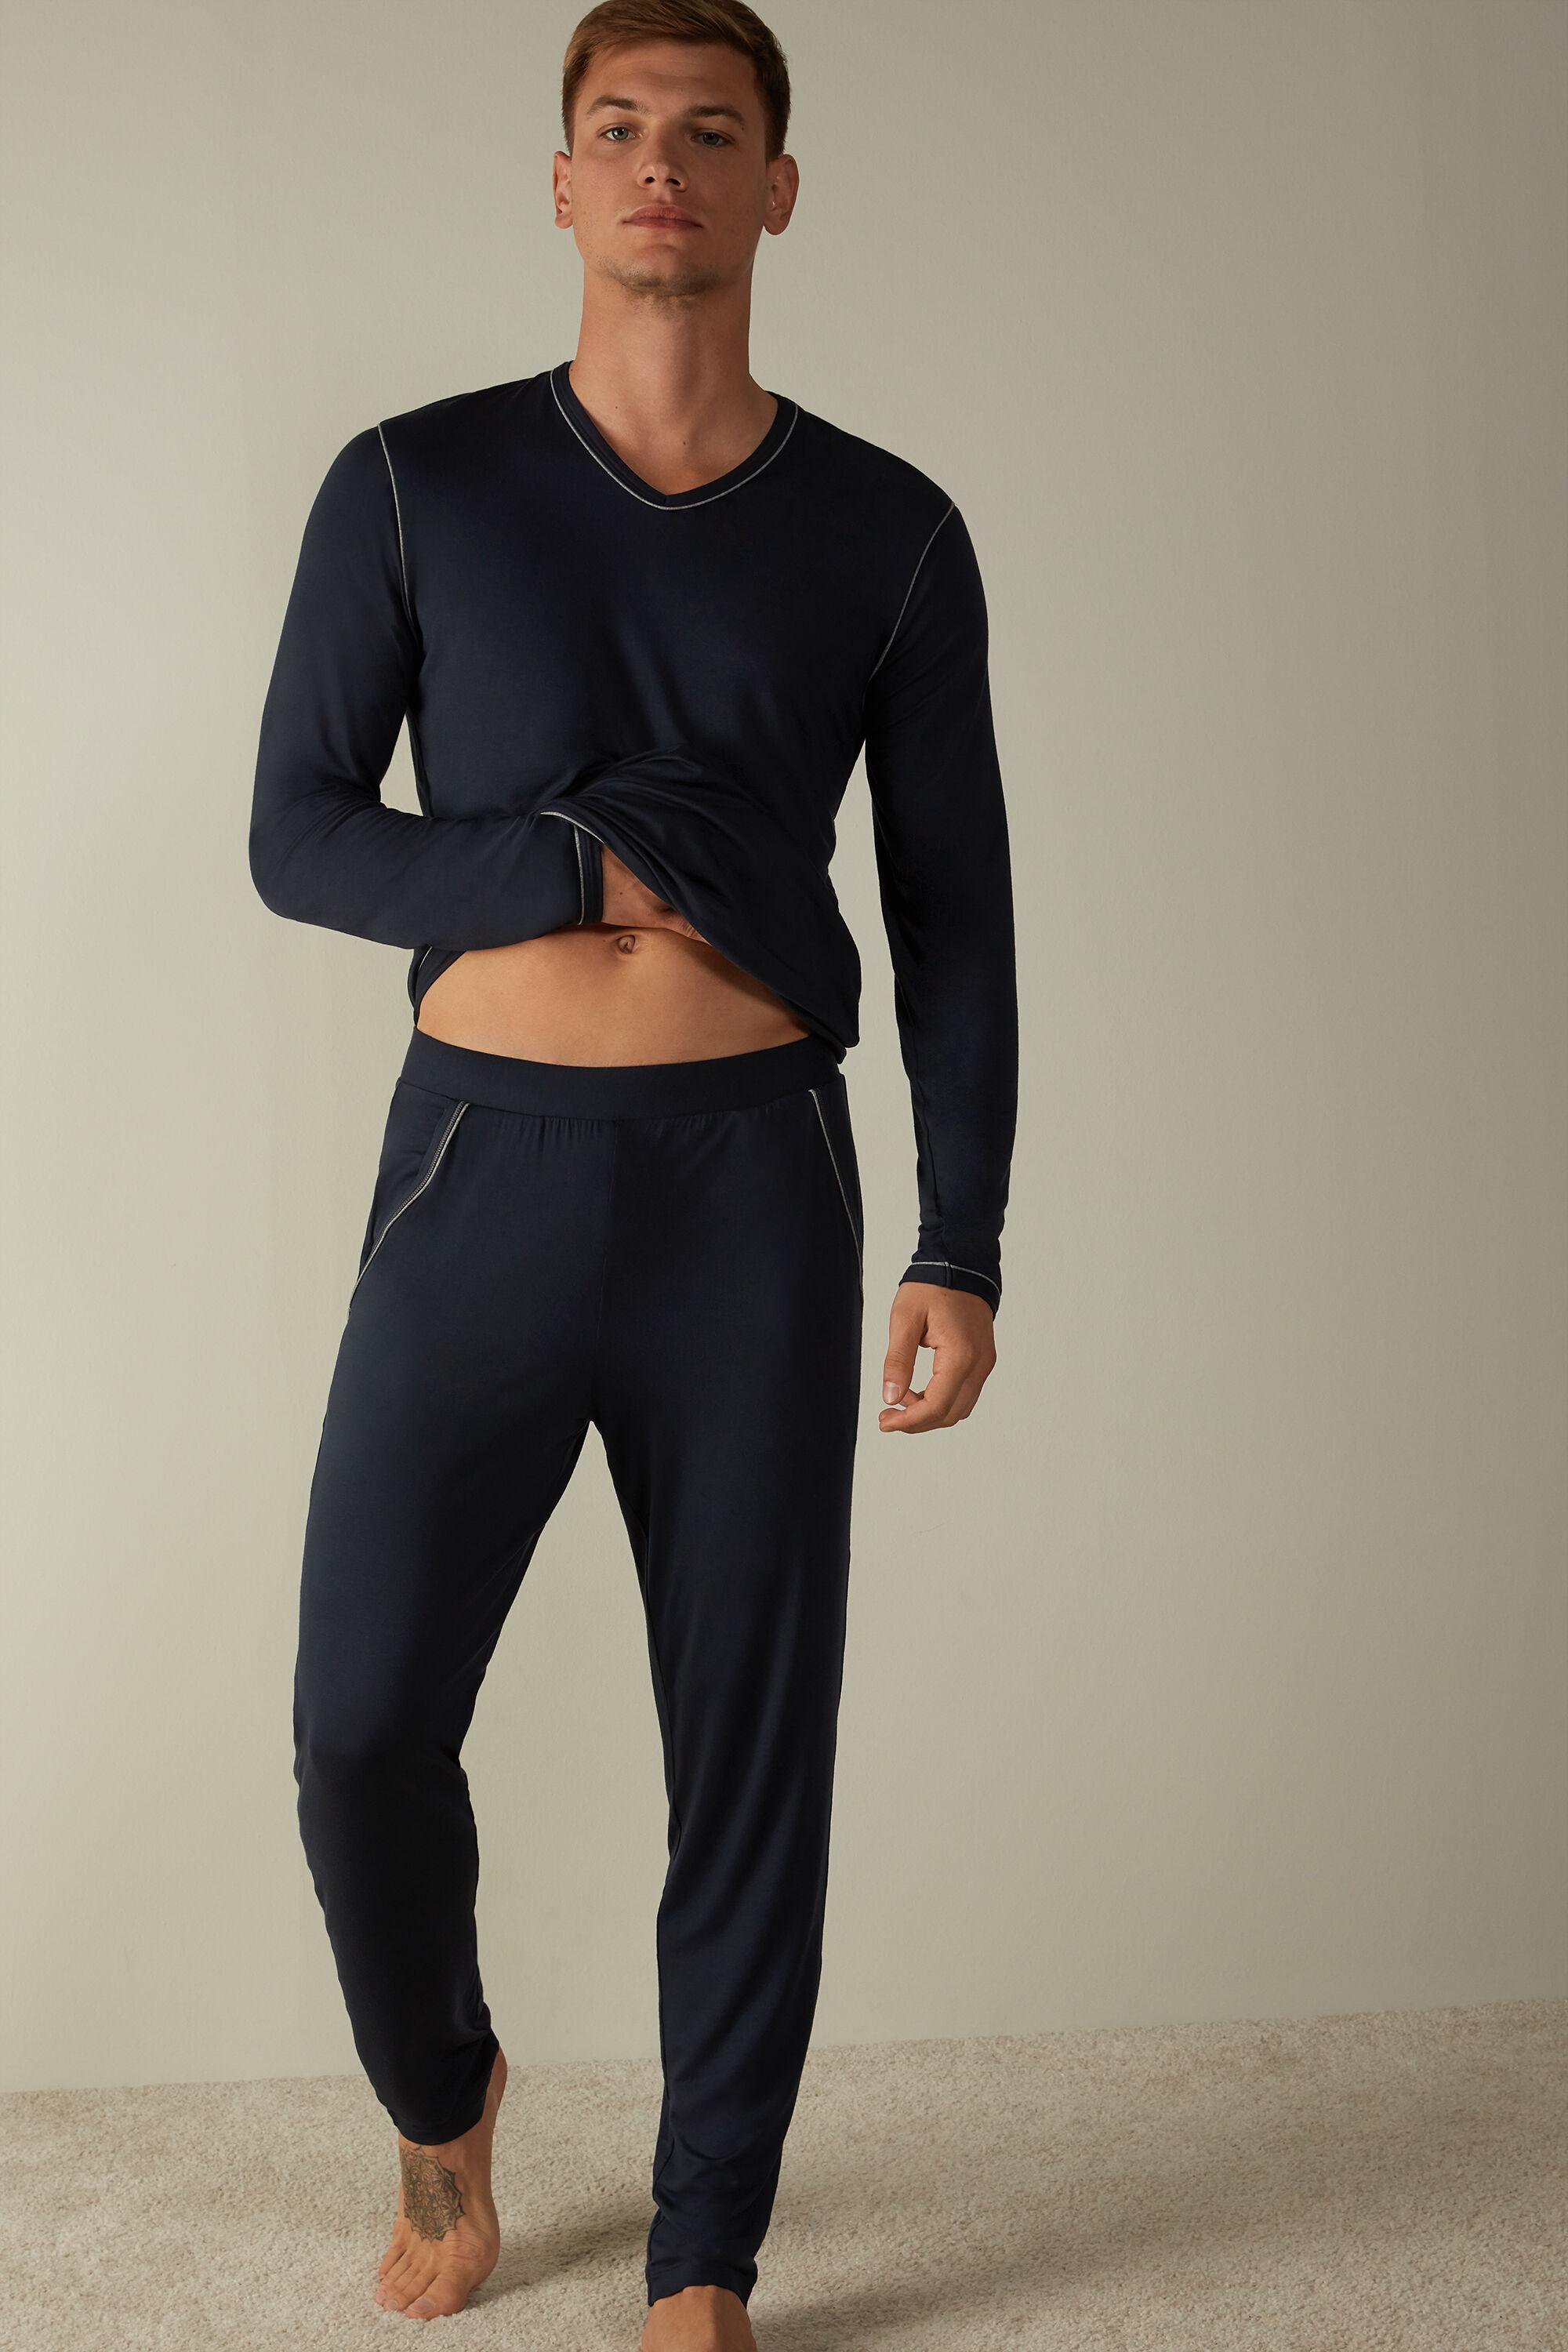 Intimissimi Micromodal Pajamas in Midnight Blue (Blue) for Men - Lyst